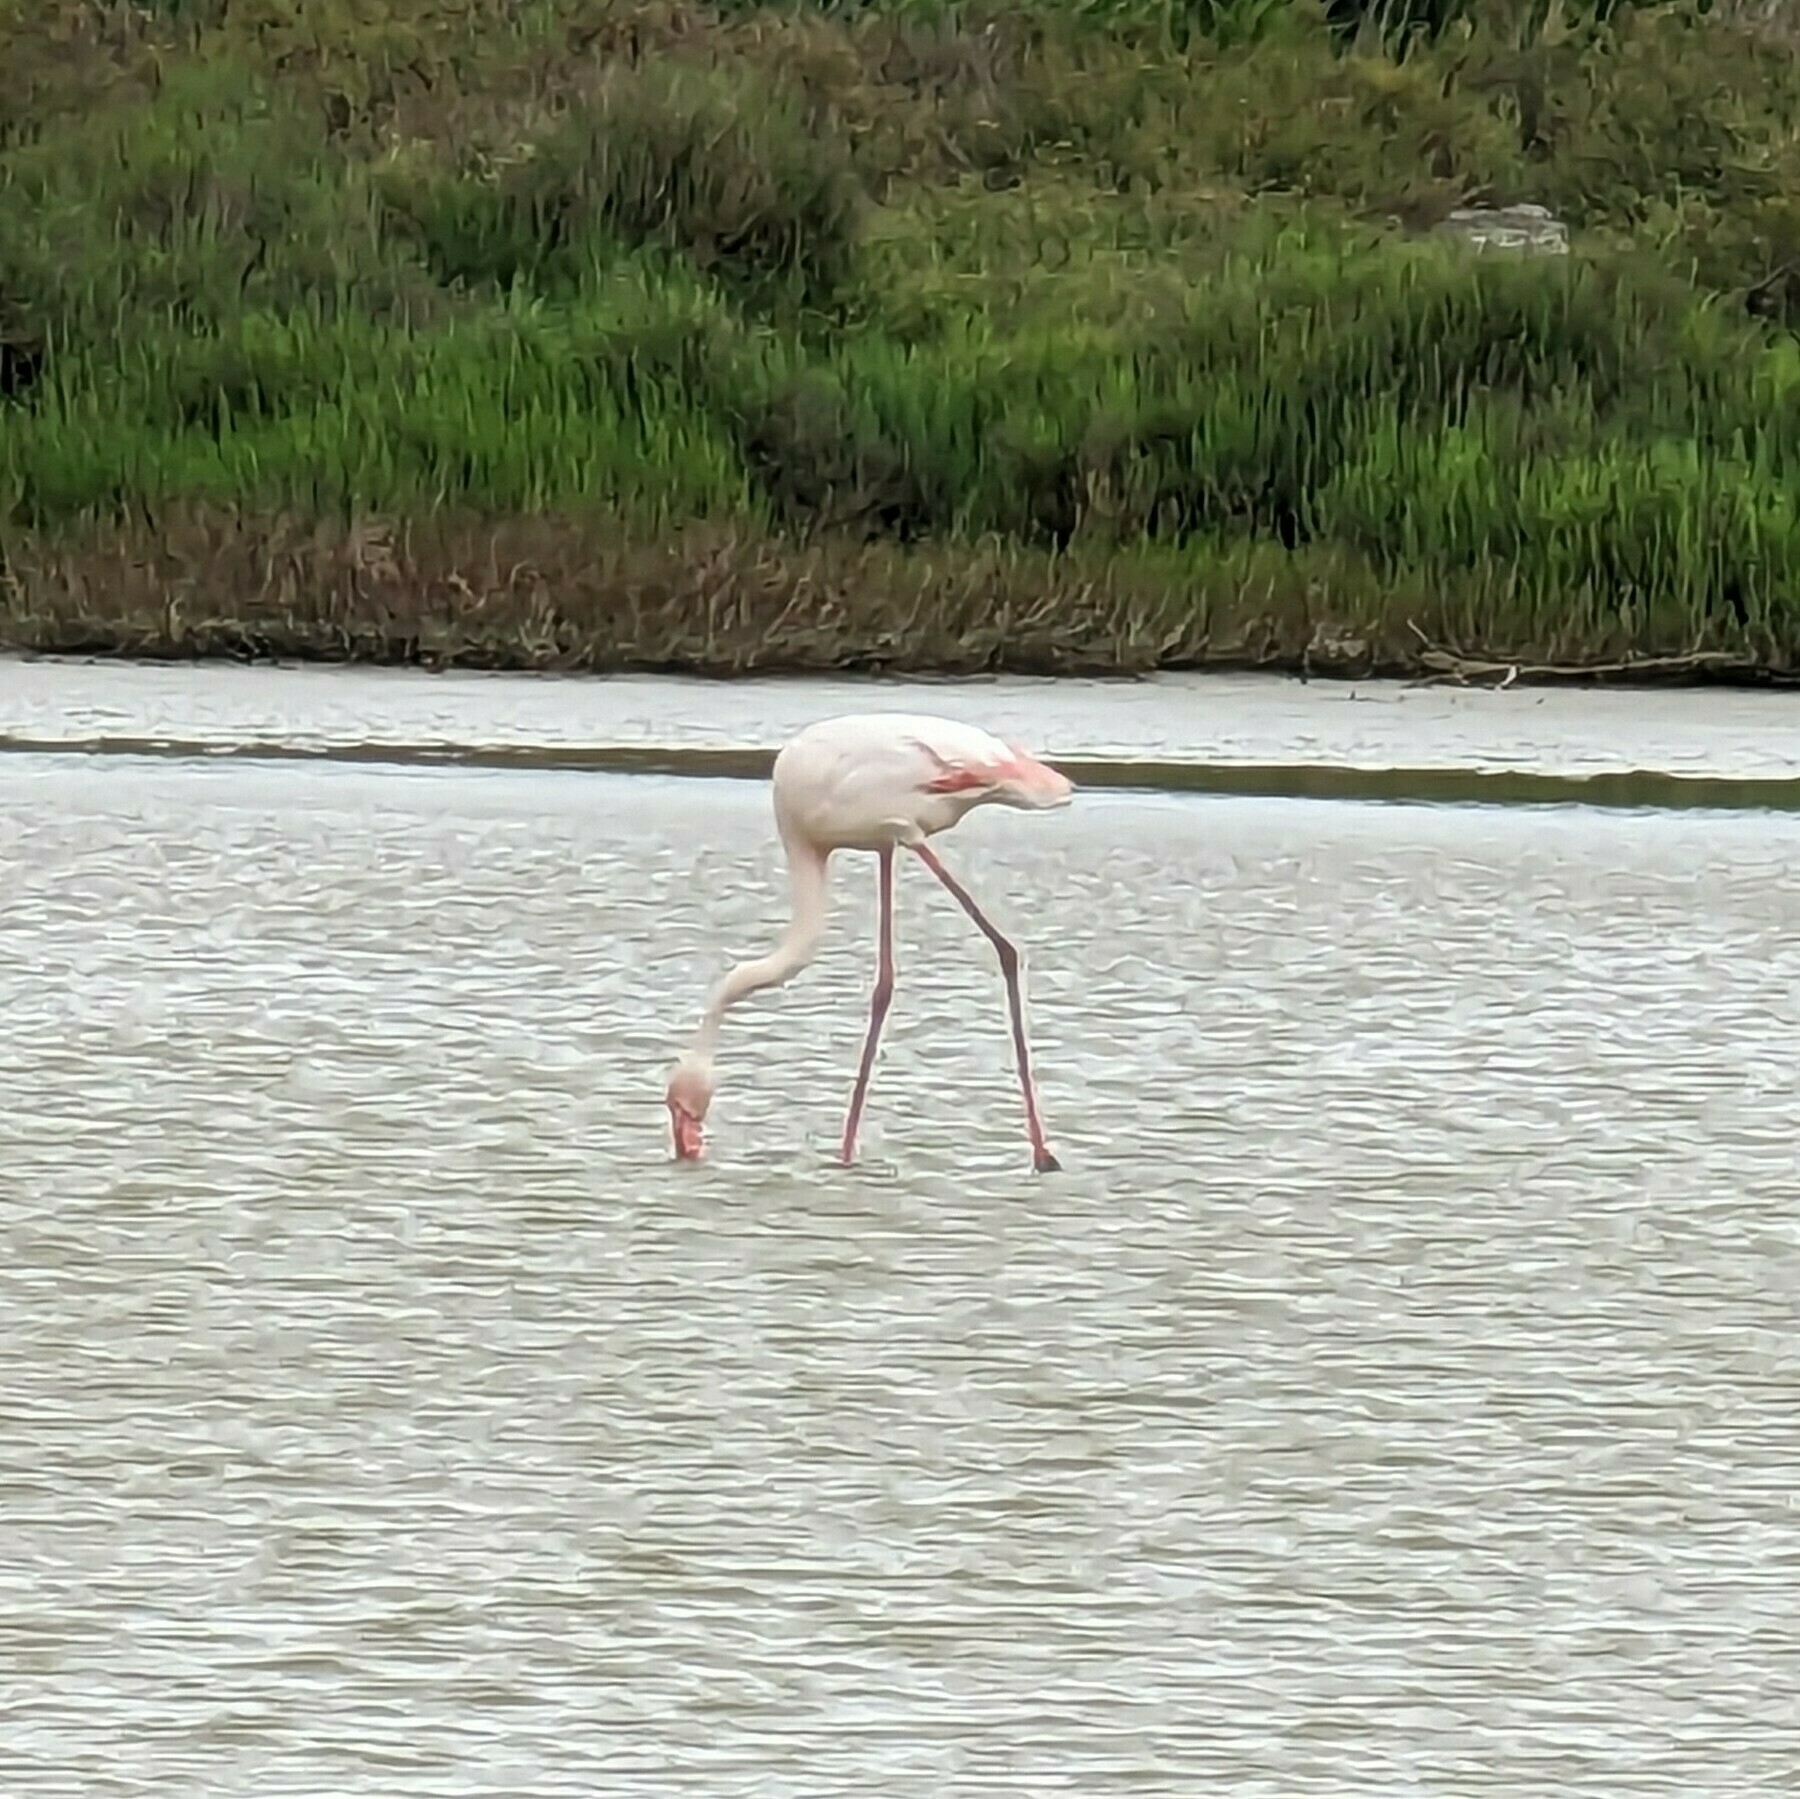 Flamingo wading in a swamp with its beak in the water looking for food.